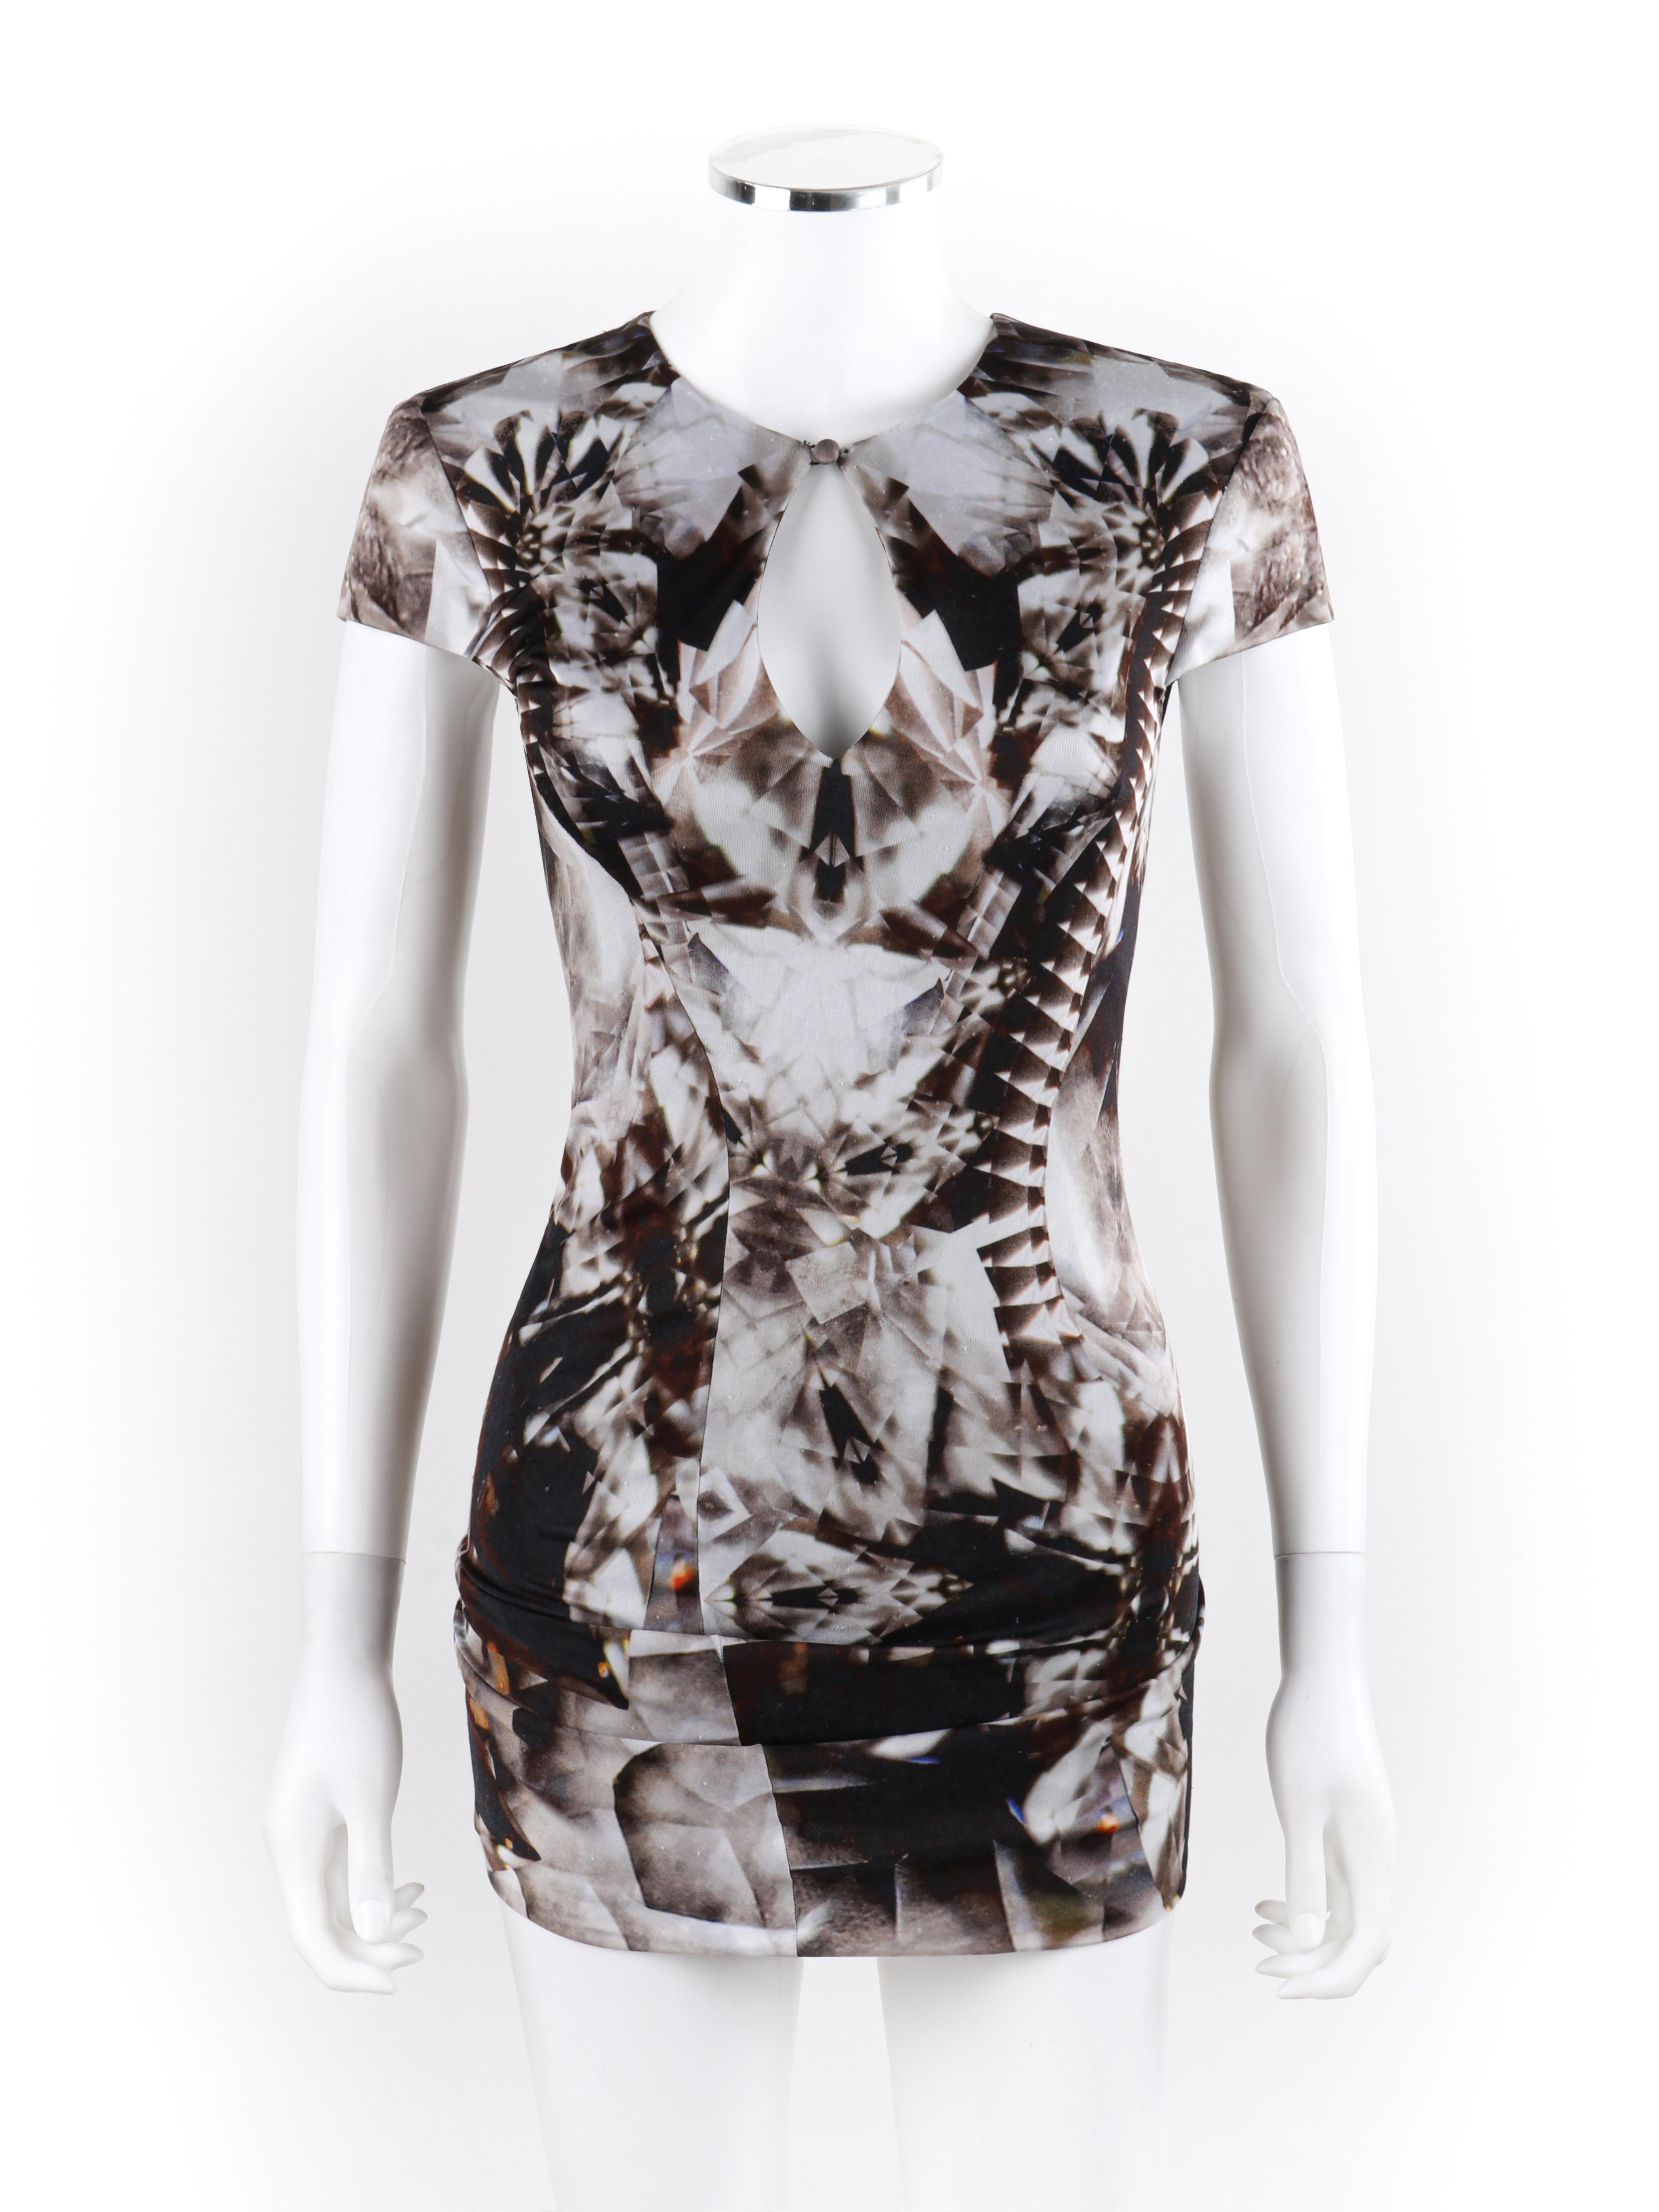 ALEXANDER McQUEEN S/S 2009 Black White Skeleton Kaleidoscope Twisted Draped Top
 
Brand / Manufacturer: Alexander McQueen
Collection: S/S 2009 “Natural Dis-tinction”
Designer: Alexander McQueen
Style: Draped cap sleeve top
Color(s): Shades of black,